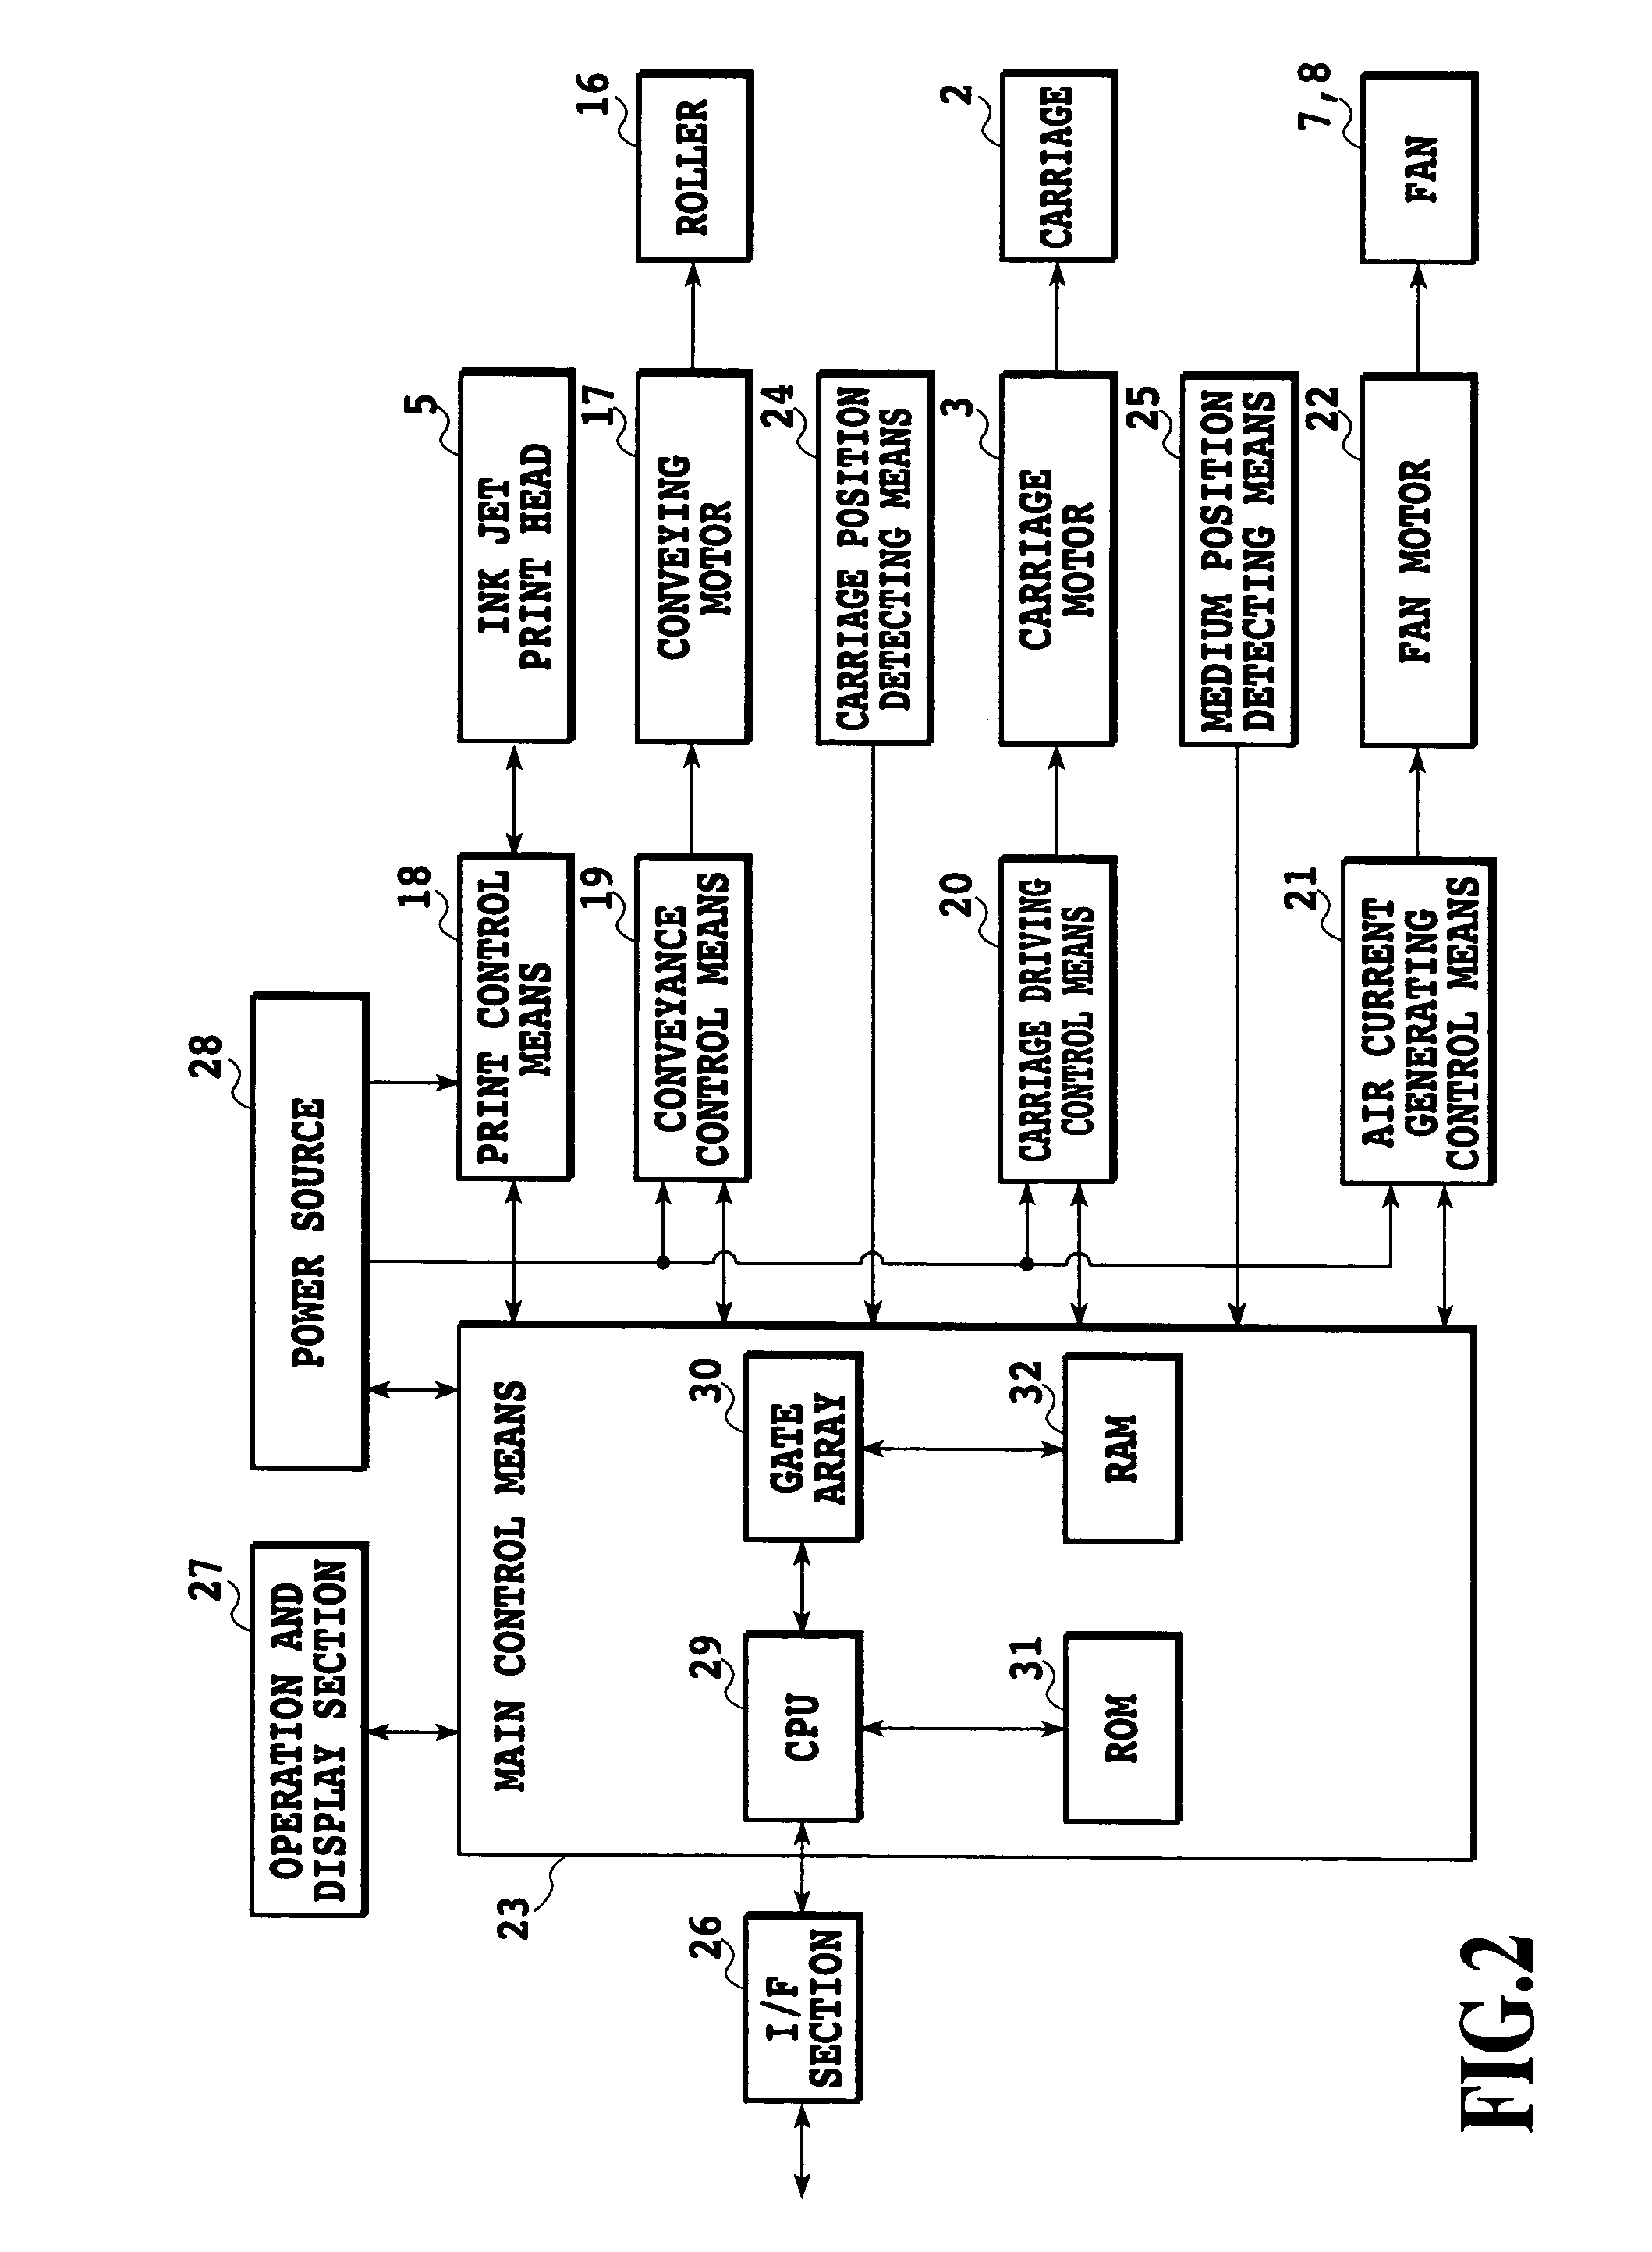 Ink jet printing apparatus and ink jet printing method with an air current generating means to remove ink mists generated in the apparatus